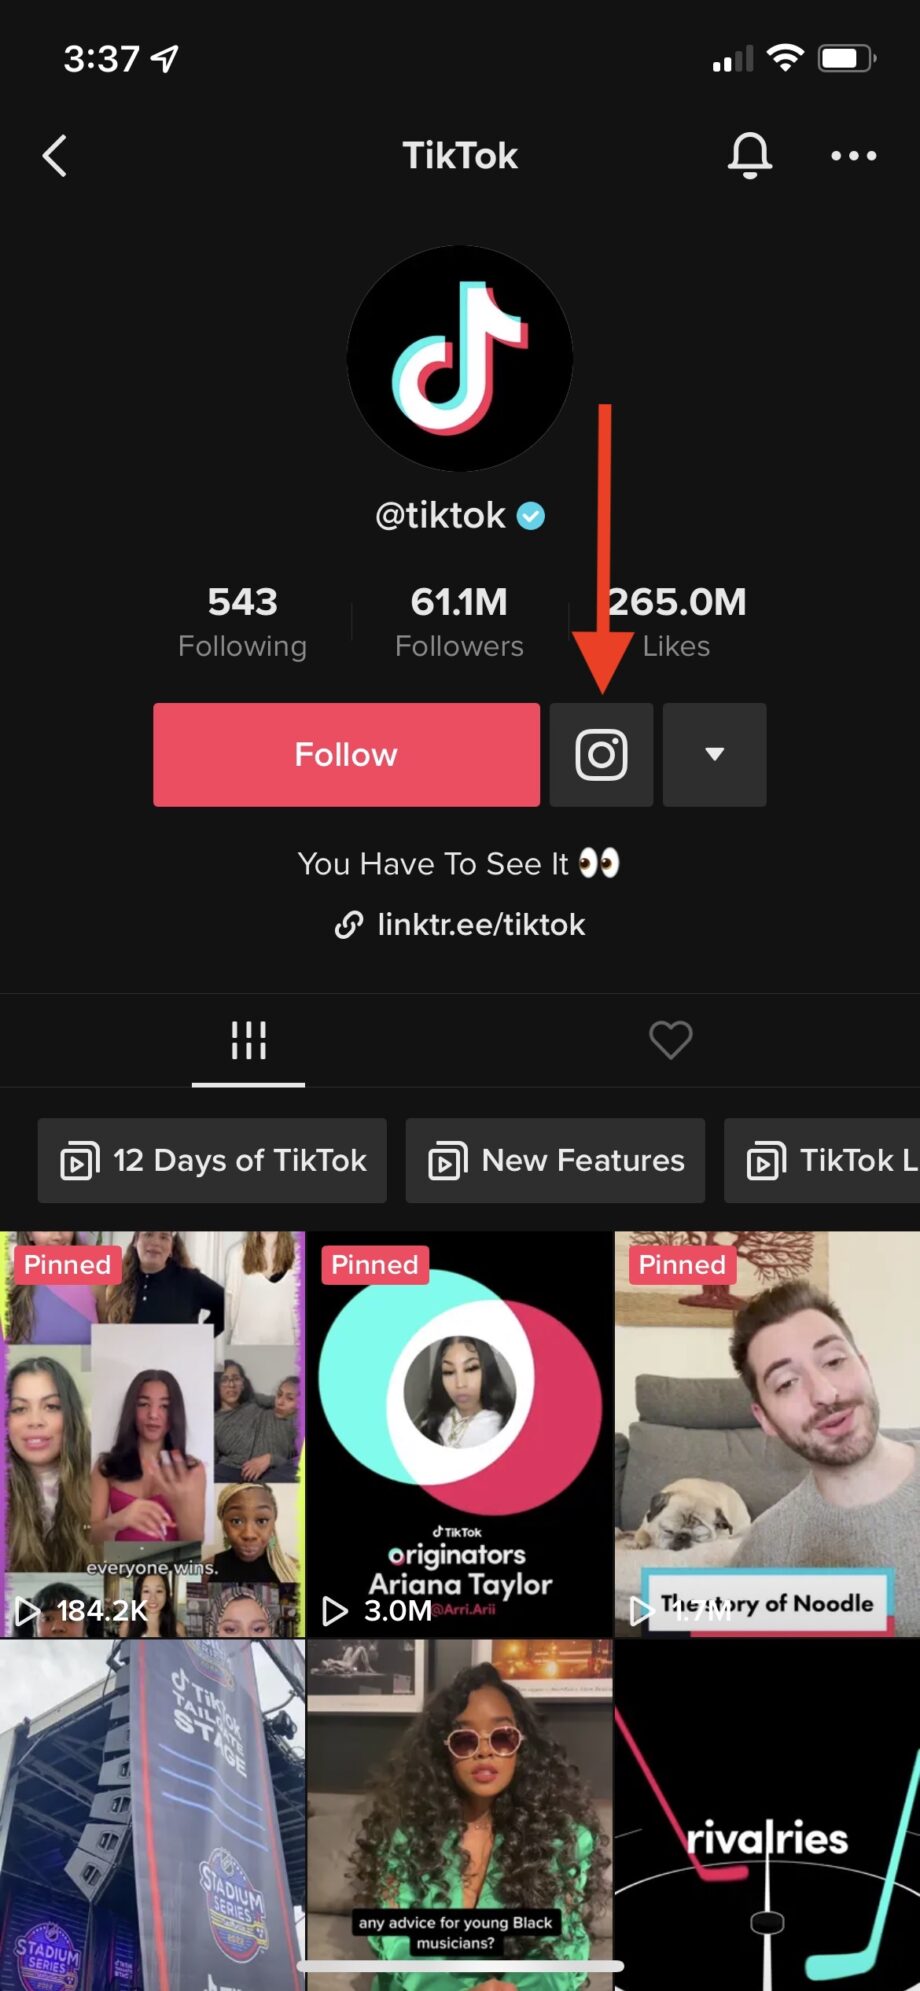 How to Add a Website To TikTok to Drive Traffic, Leads, and Sales In 2024